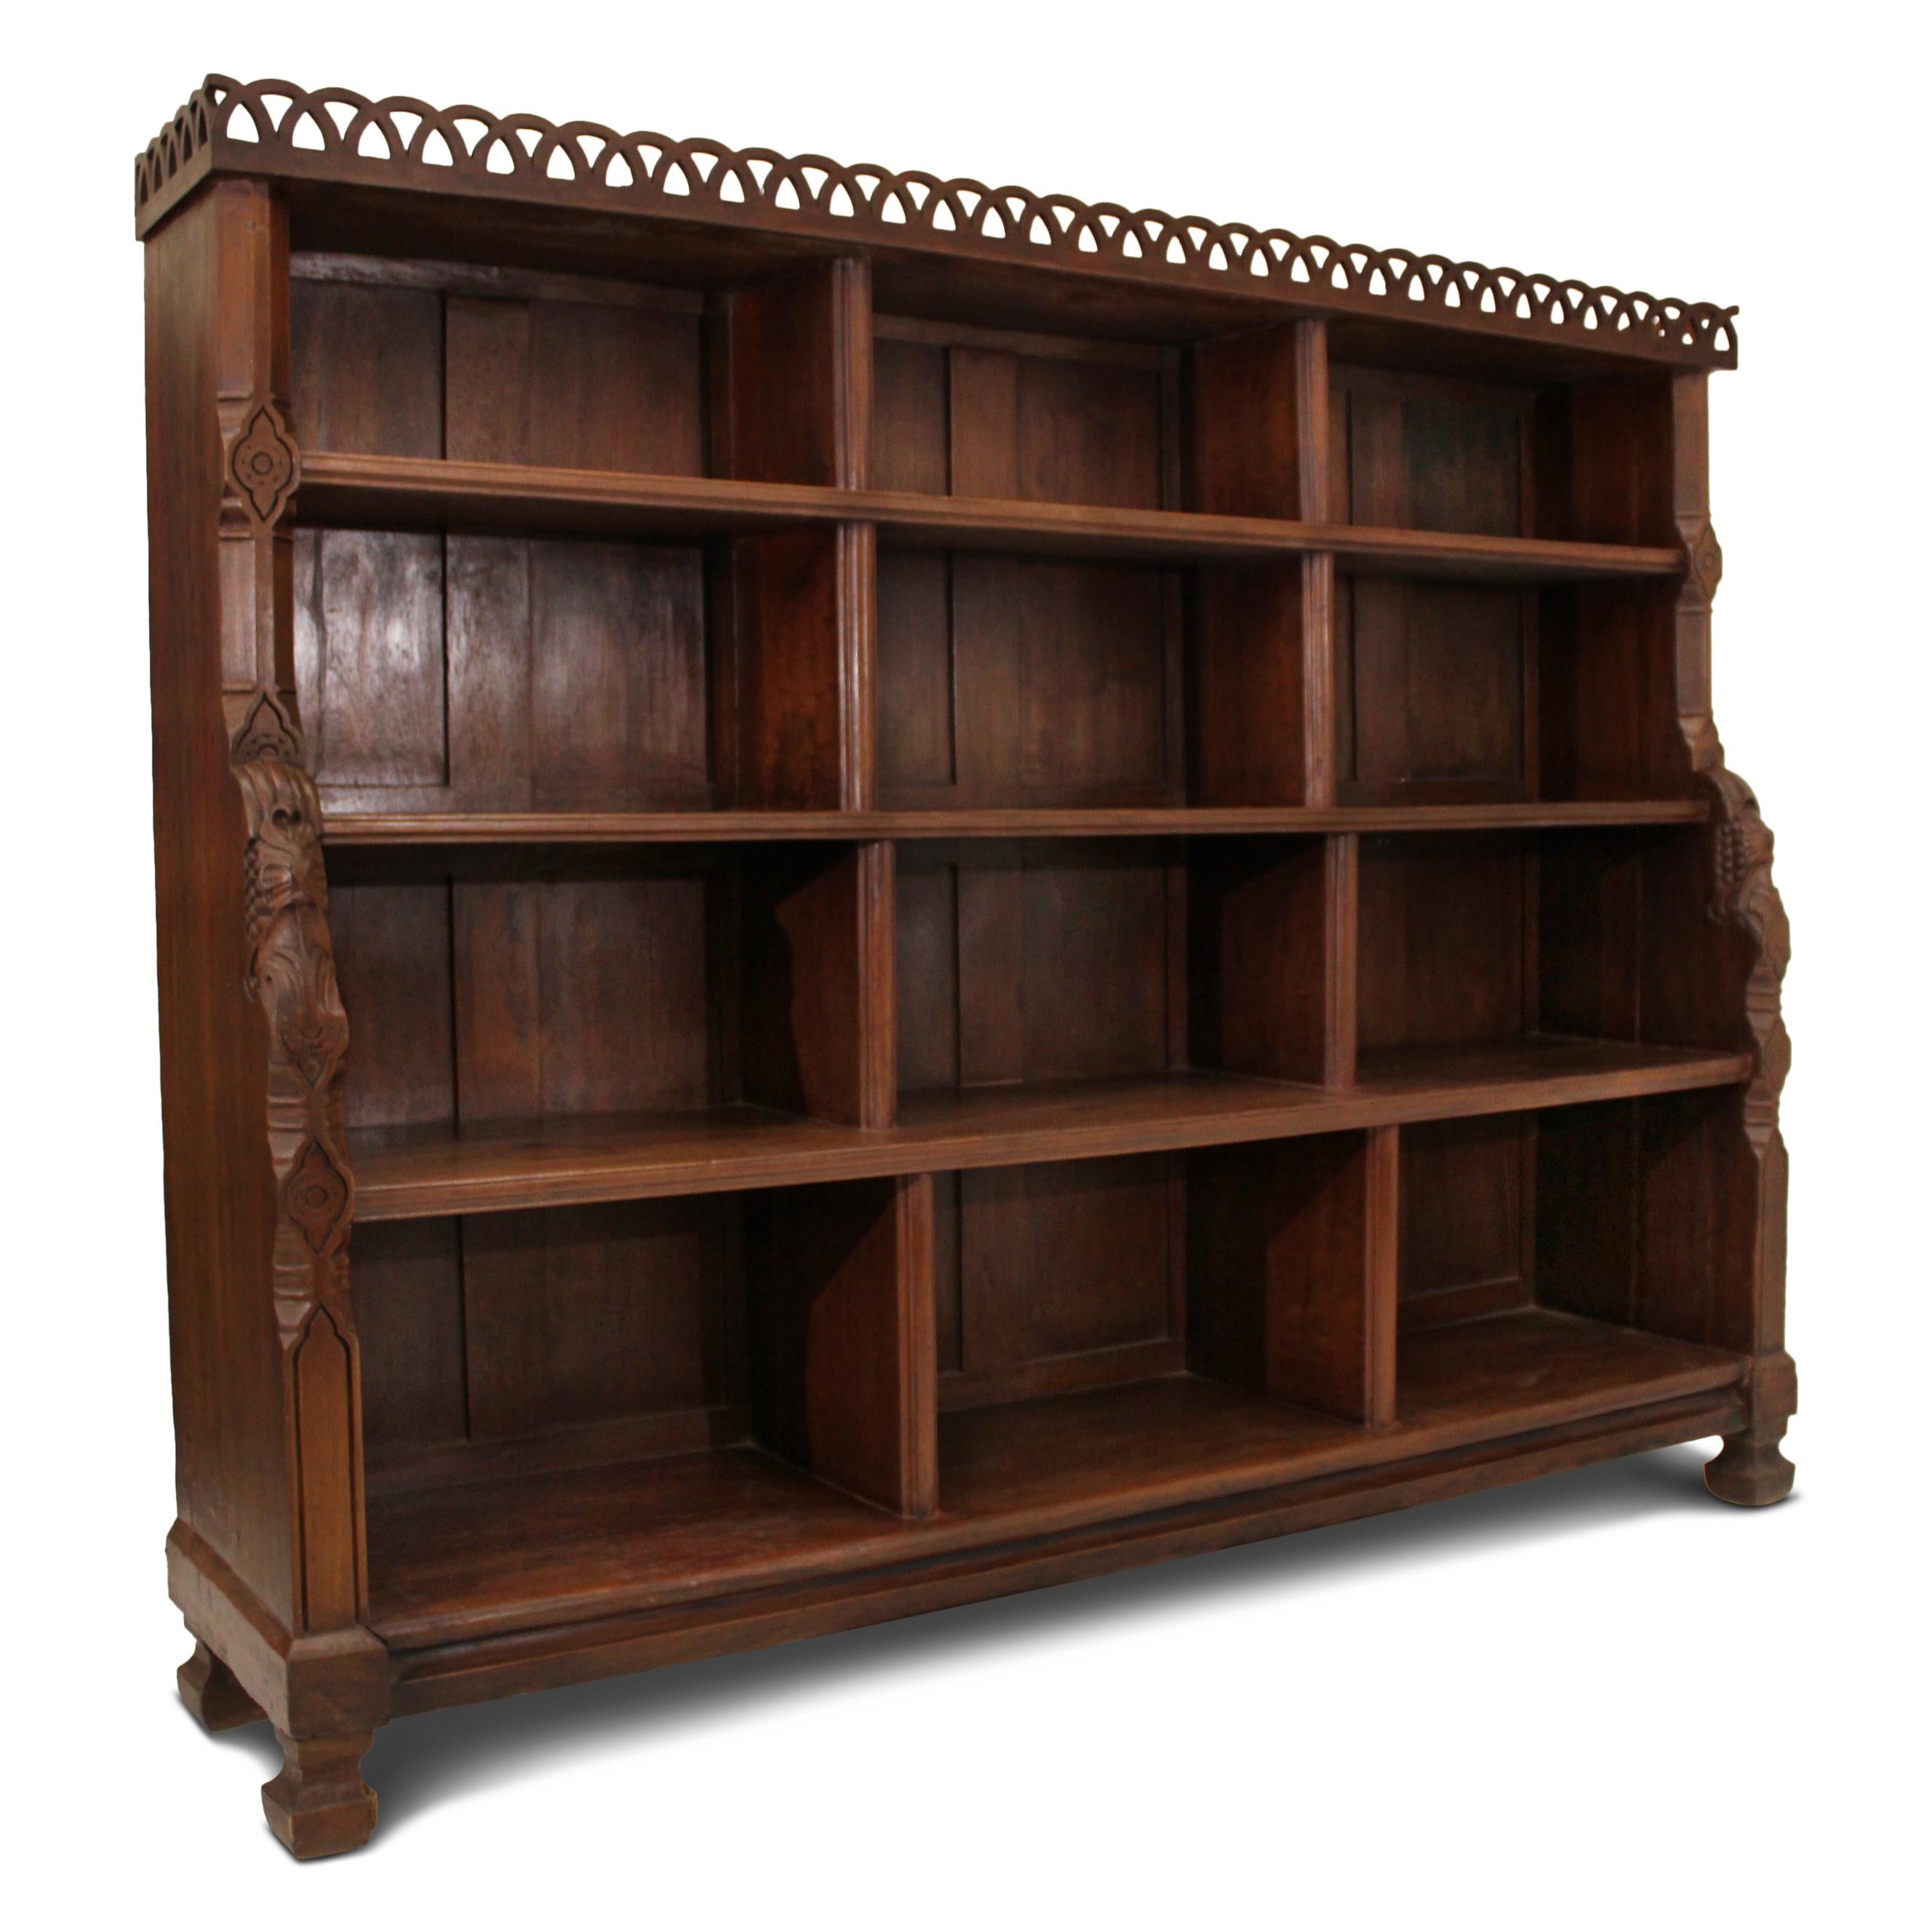 Teak bookcase, originating from an Indian palace library. This hand carved bookcase features thick, solid, graduated shelving and is adorned with a fret gallery on top.  